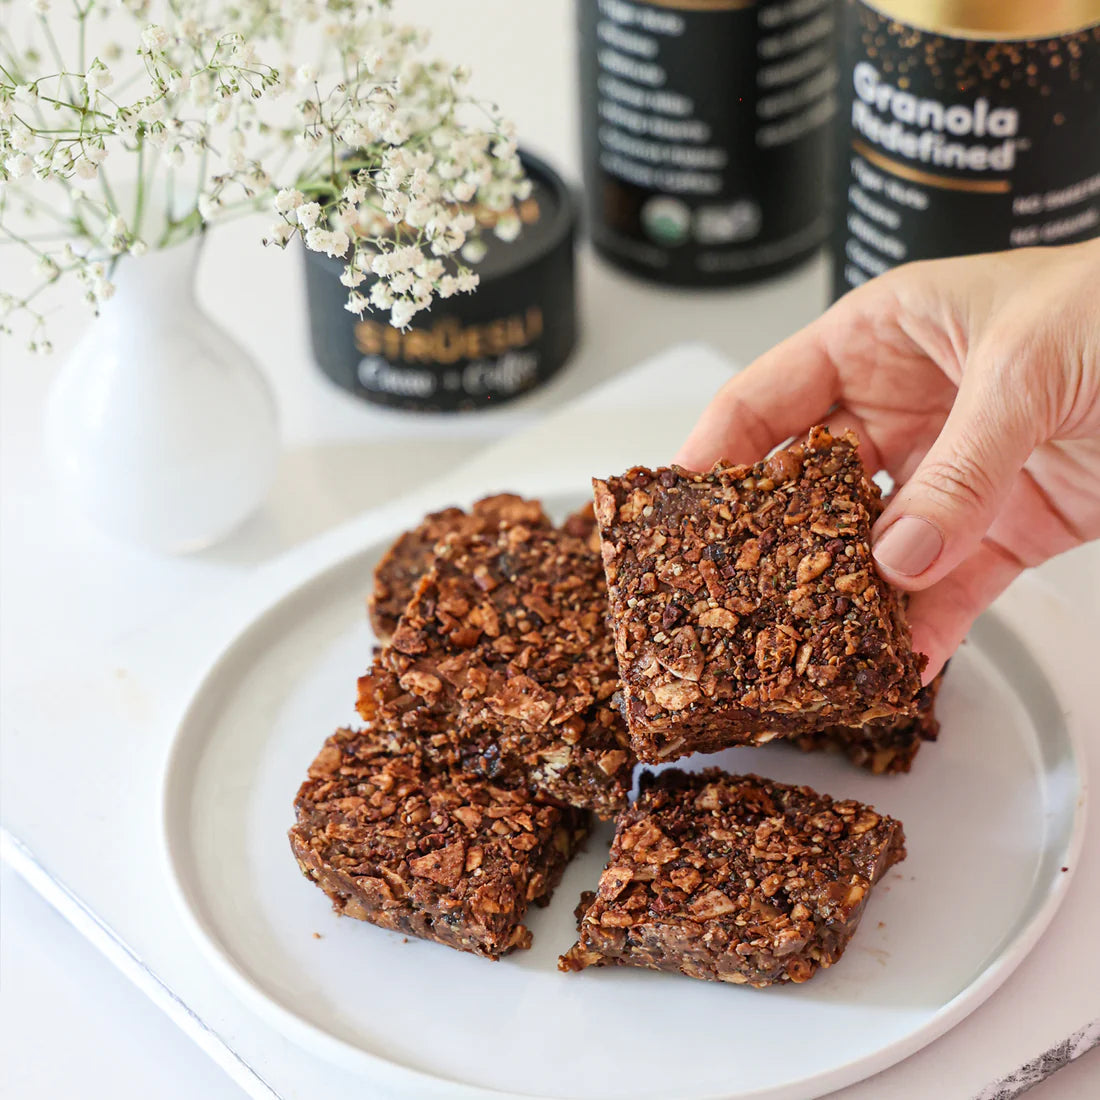 Crunchy breakfast bars stacked on a plate, made using Struesli's cacao + coffee granola.